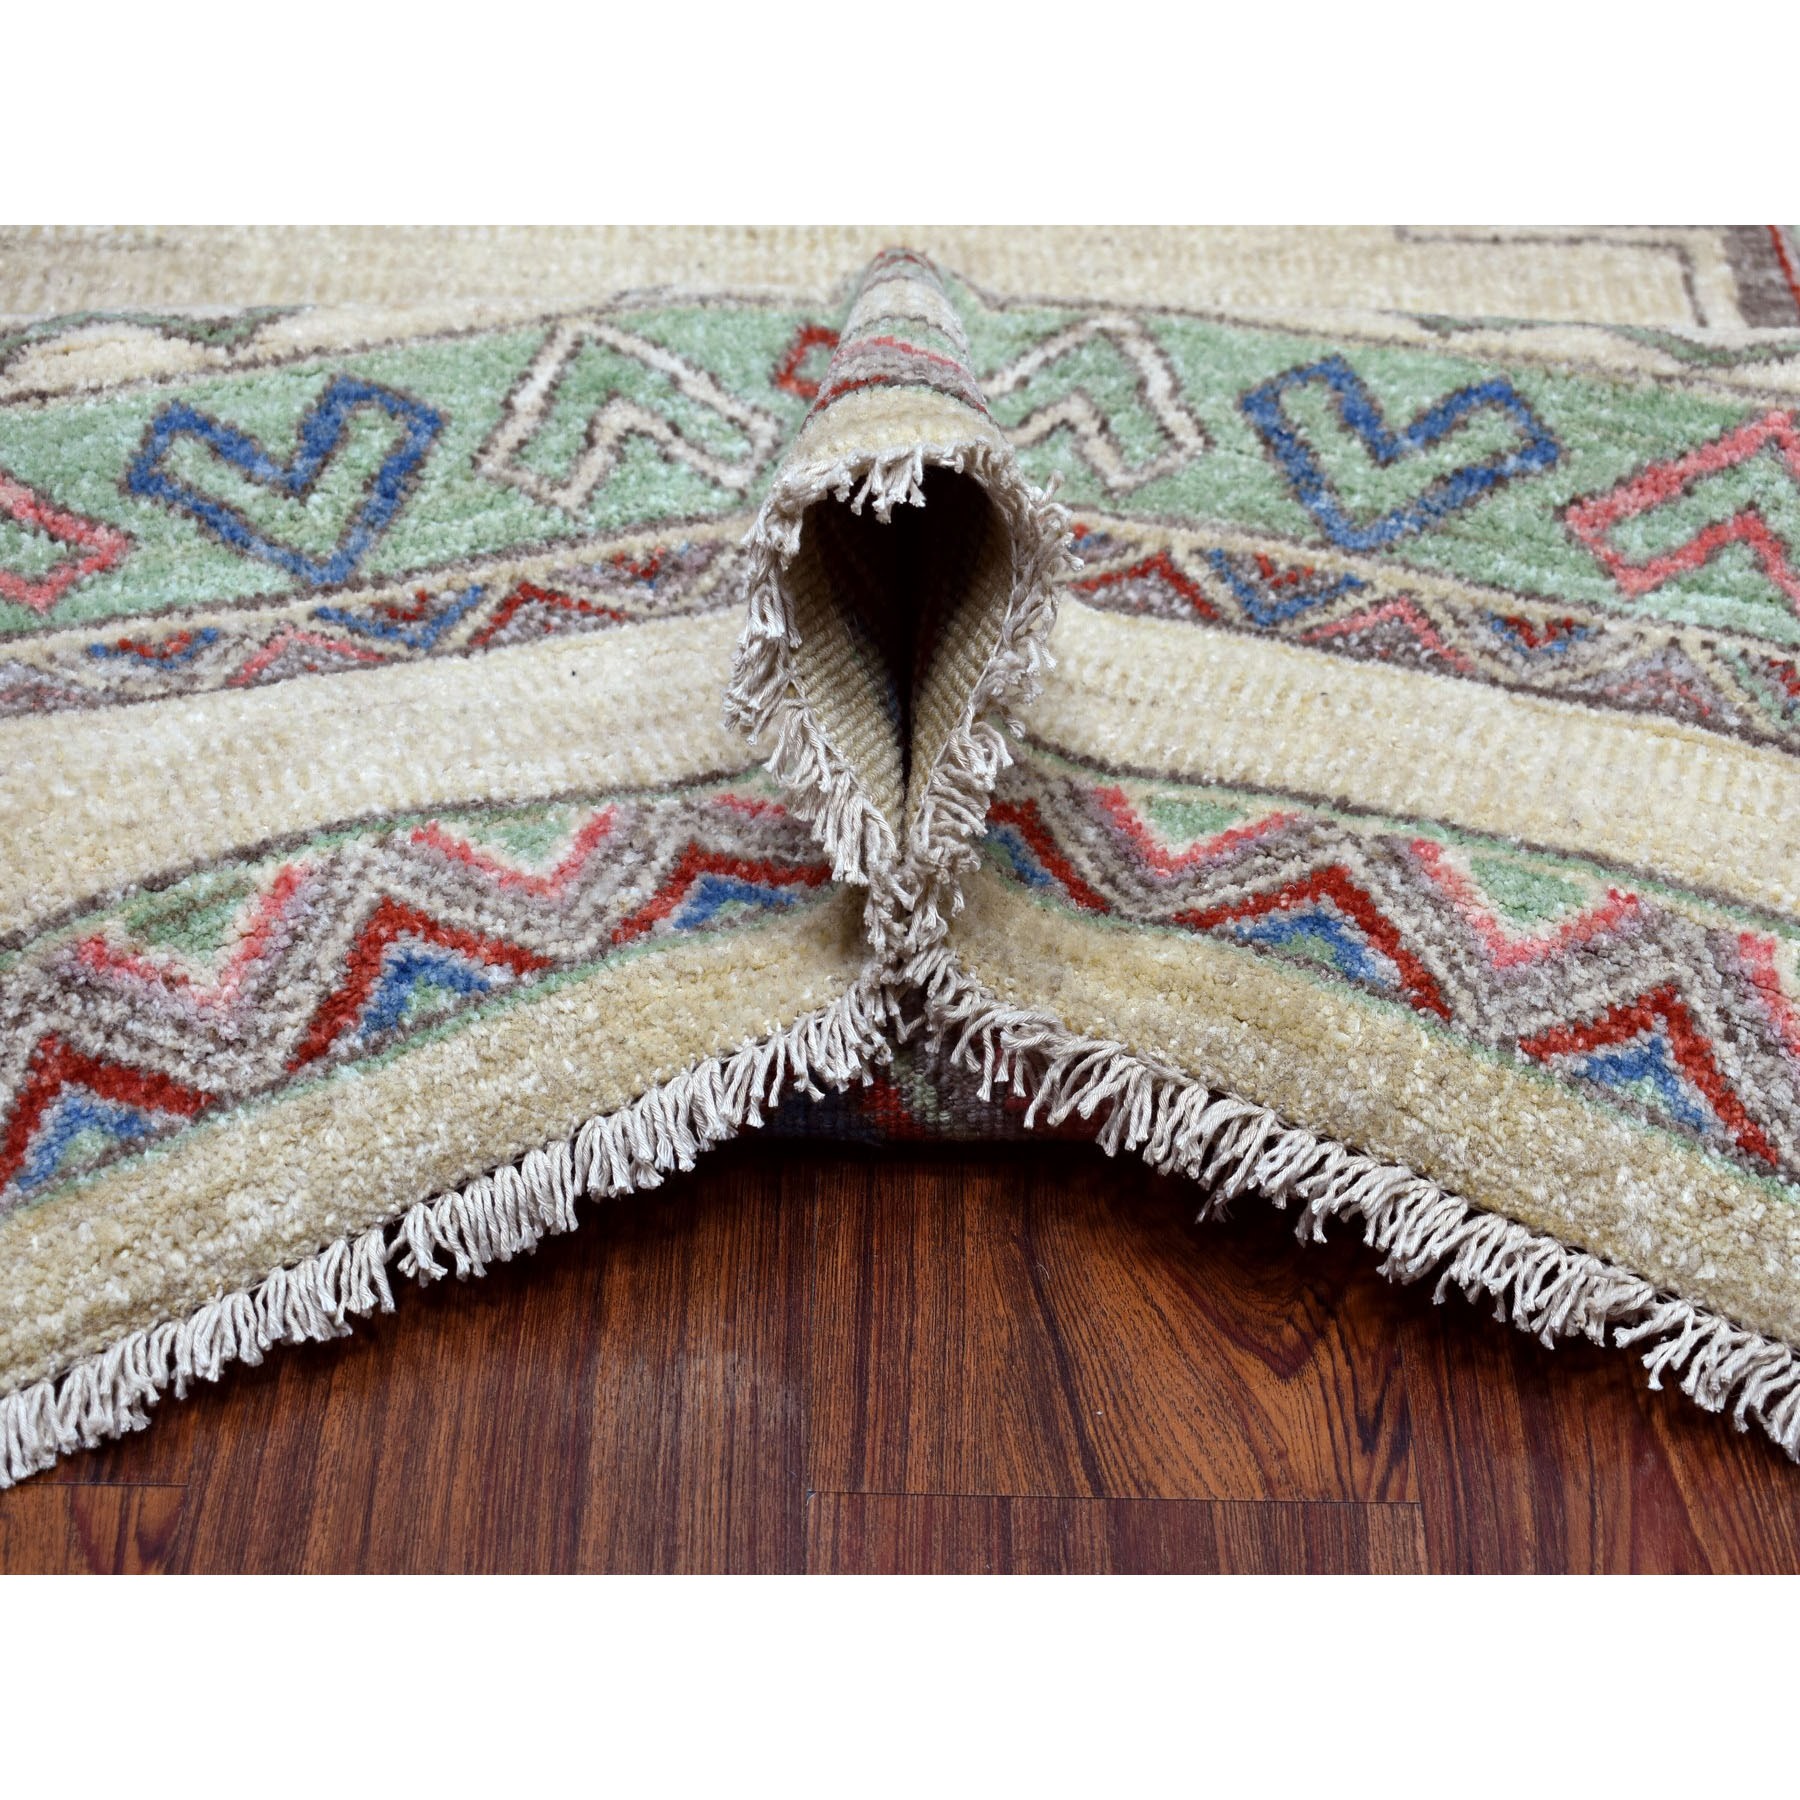 9-x11-10  Peshawar With Berber Motifs,Pop Of Color Pure Wool Hand Knotted Oriental Rug 